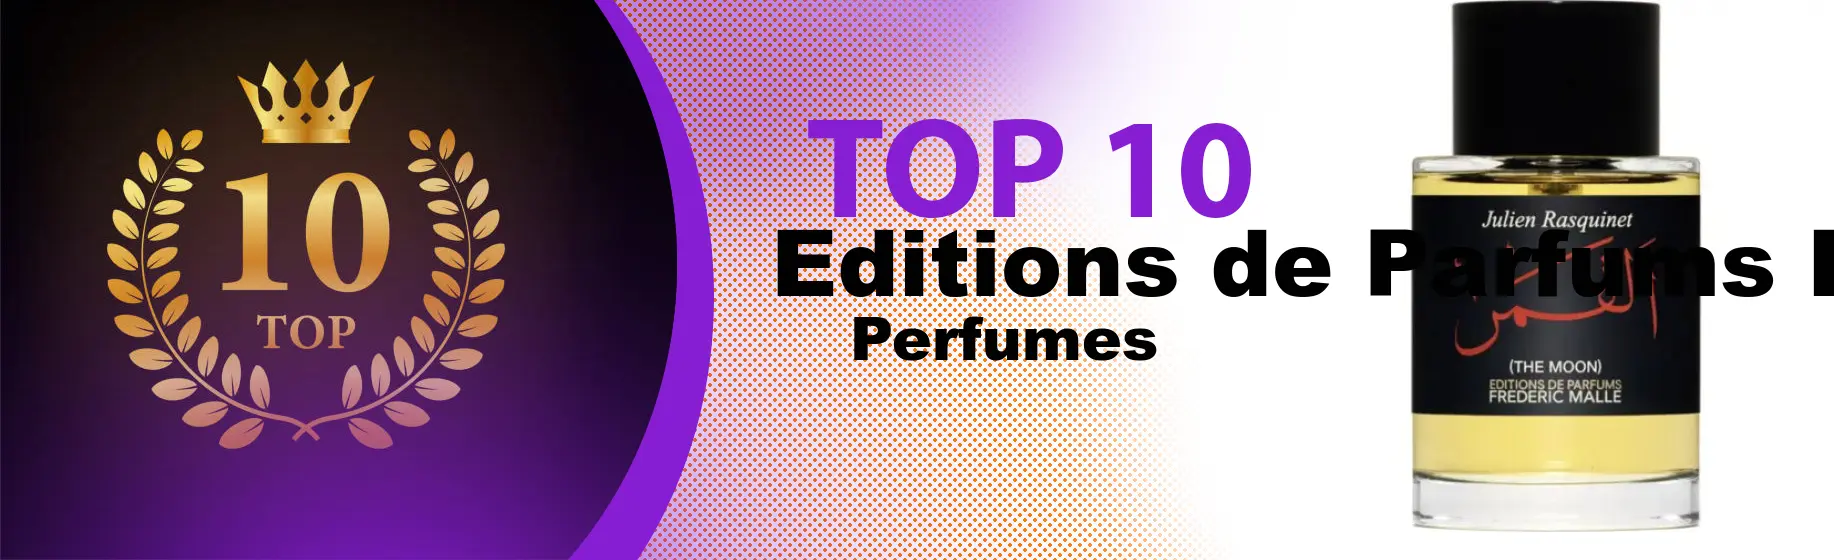 Top 10 Best Editions de Parfums Frédéric Malle perfumes : Ultimate Buyer Guide